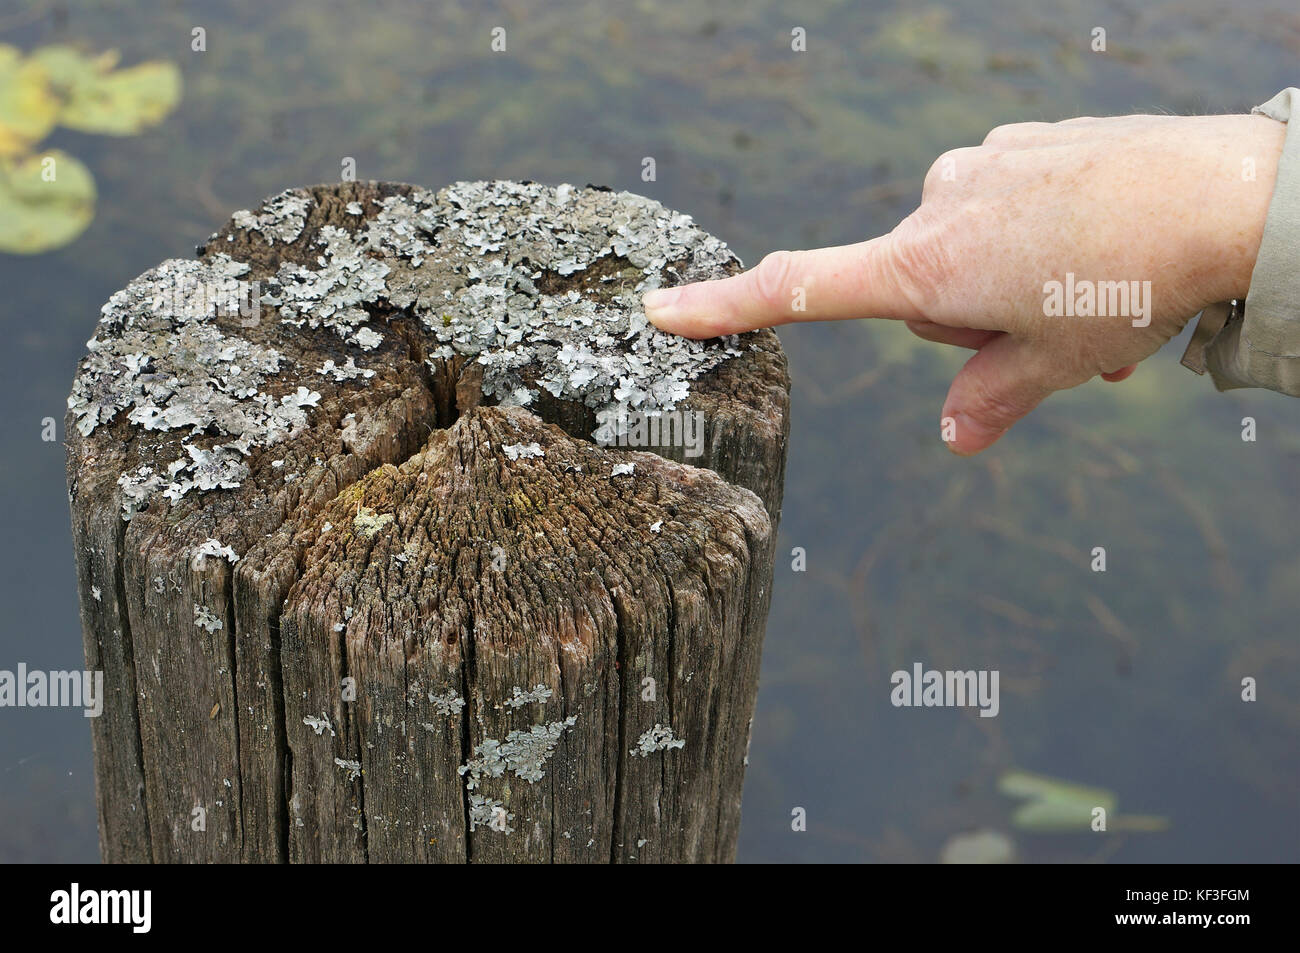 It is a gray lichen that grows on a rotten old tree near a forest lake. The finger of the right hand of the elderly grandmother points to the center o Stock Photo